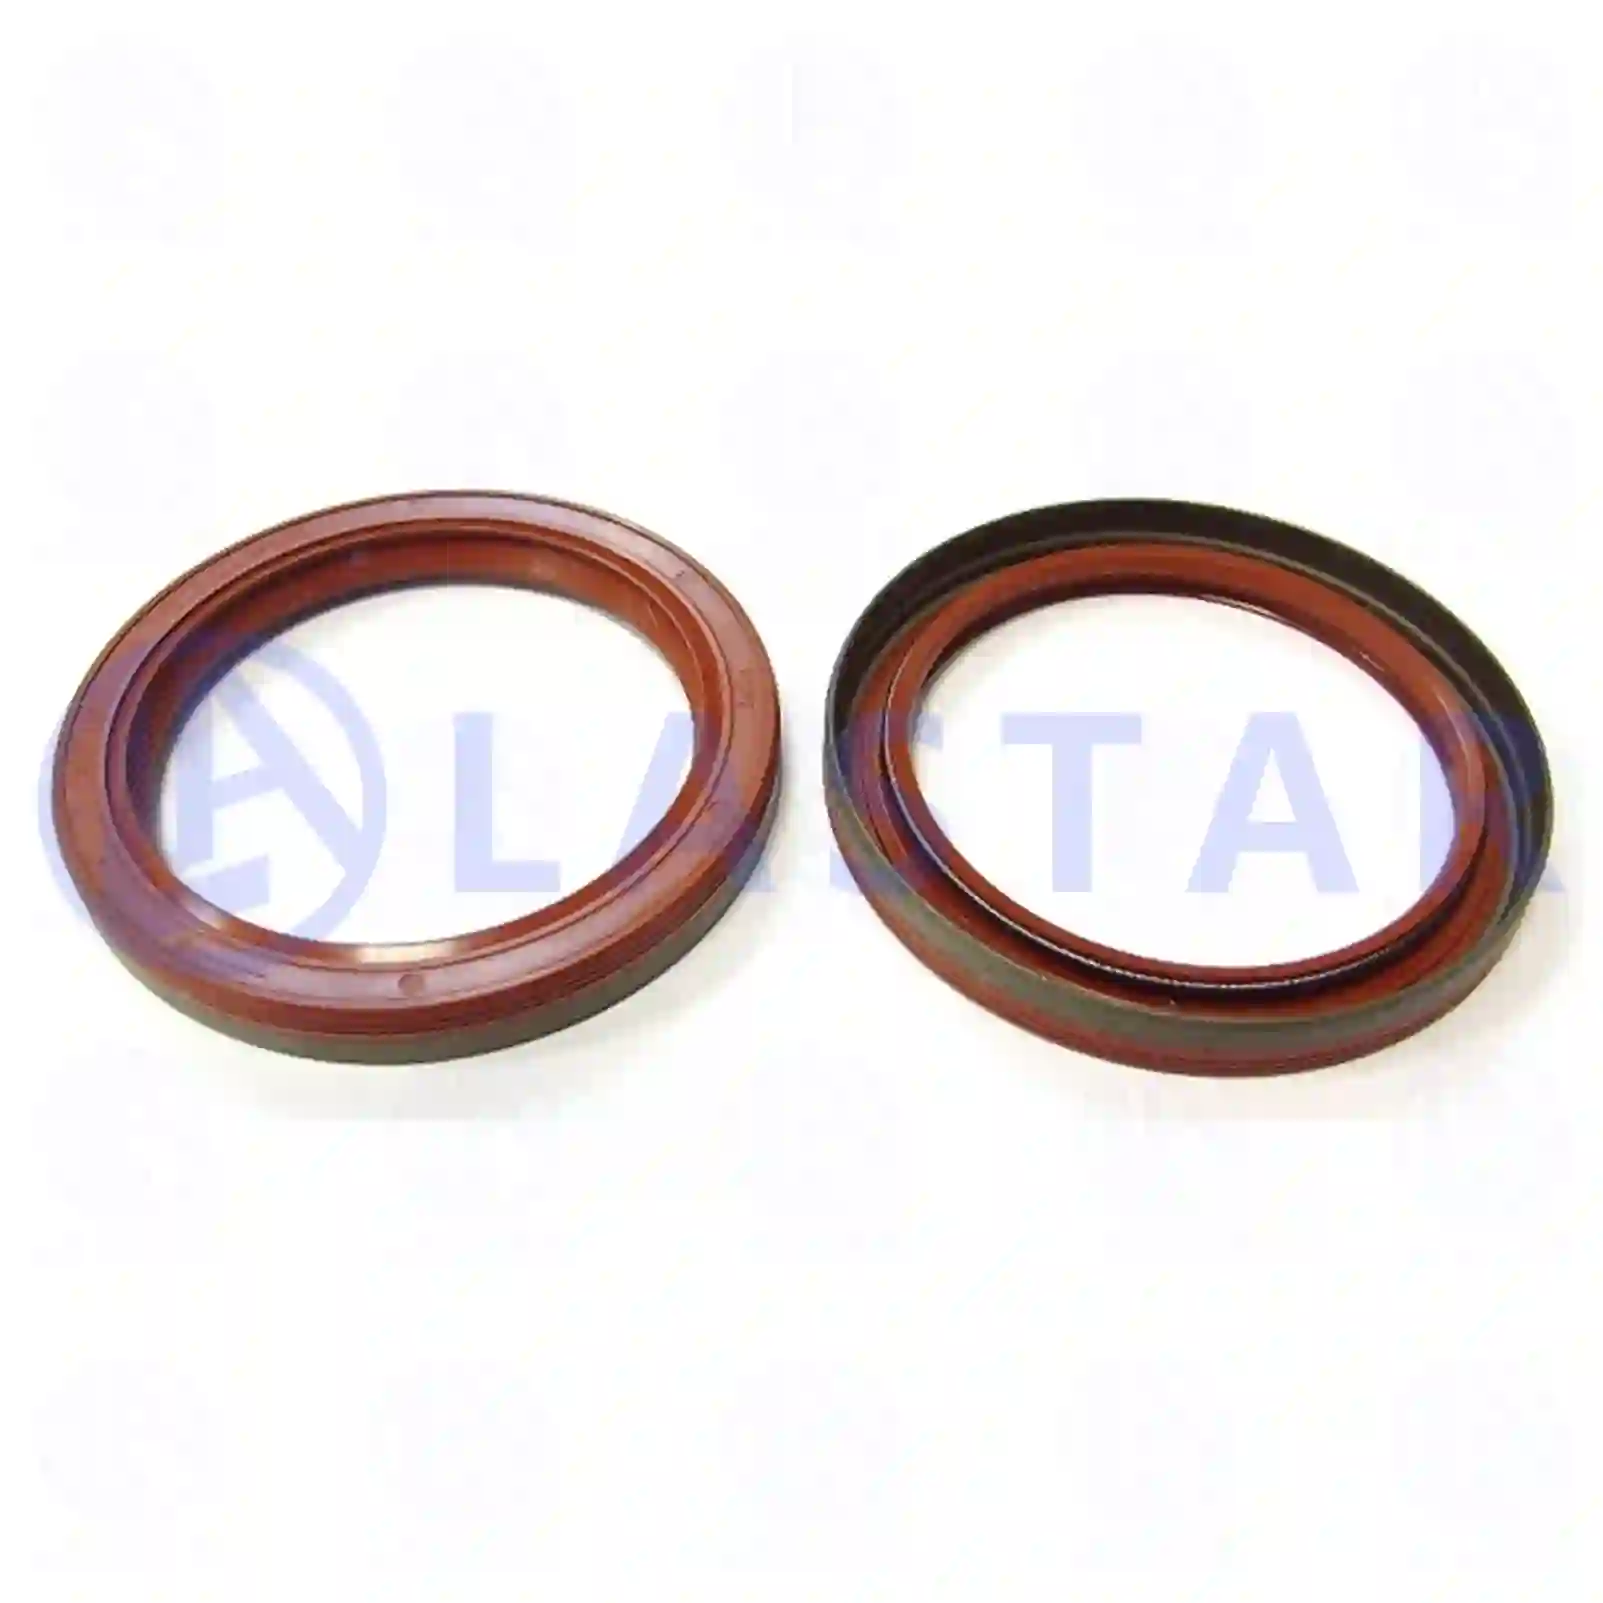 Oil seal, 77701246, 98454041, 080729, 1615787, 07301198, 40003650, 40003657, 40100070, 40100331, 40100334, 5000815434, 98427998, 98428409, 98454041, 99433965, 9111049, 40100331, 42531636, 42562103, 98427998, 98454039, 98454041, 40003650, 40100330, 98428409, 98454041, 06562790359, 4403049, 080729, 5000815434, 5001001254, 5001853924, 7701035740, 7701046541, 7701461930 ||  77701246 Lastar Spare Part | Truck Spare Parts, Auotomotive Spare Parts Oil seal, 77701246, 98454041, 080729, 1615787, 07301198, 40003650, 40003657, 40100070, 40100331, 40100334, 5000815434, 98427998, 98428409, 98454041, 99433965, 9111049, 40100331, 42531636, 42562103, 98427998, 98454039, 98454041, 40003650, 40100330, 98428409, 98454041, 06562790359, 4403049, 080729, 5000815434, 5001001254, 5001853924, 7701035740, 7701046541, 7701461930 ||  77701246 Lastar Spare Part | Truck Spare Parts, Auotomotive Spare Parts